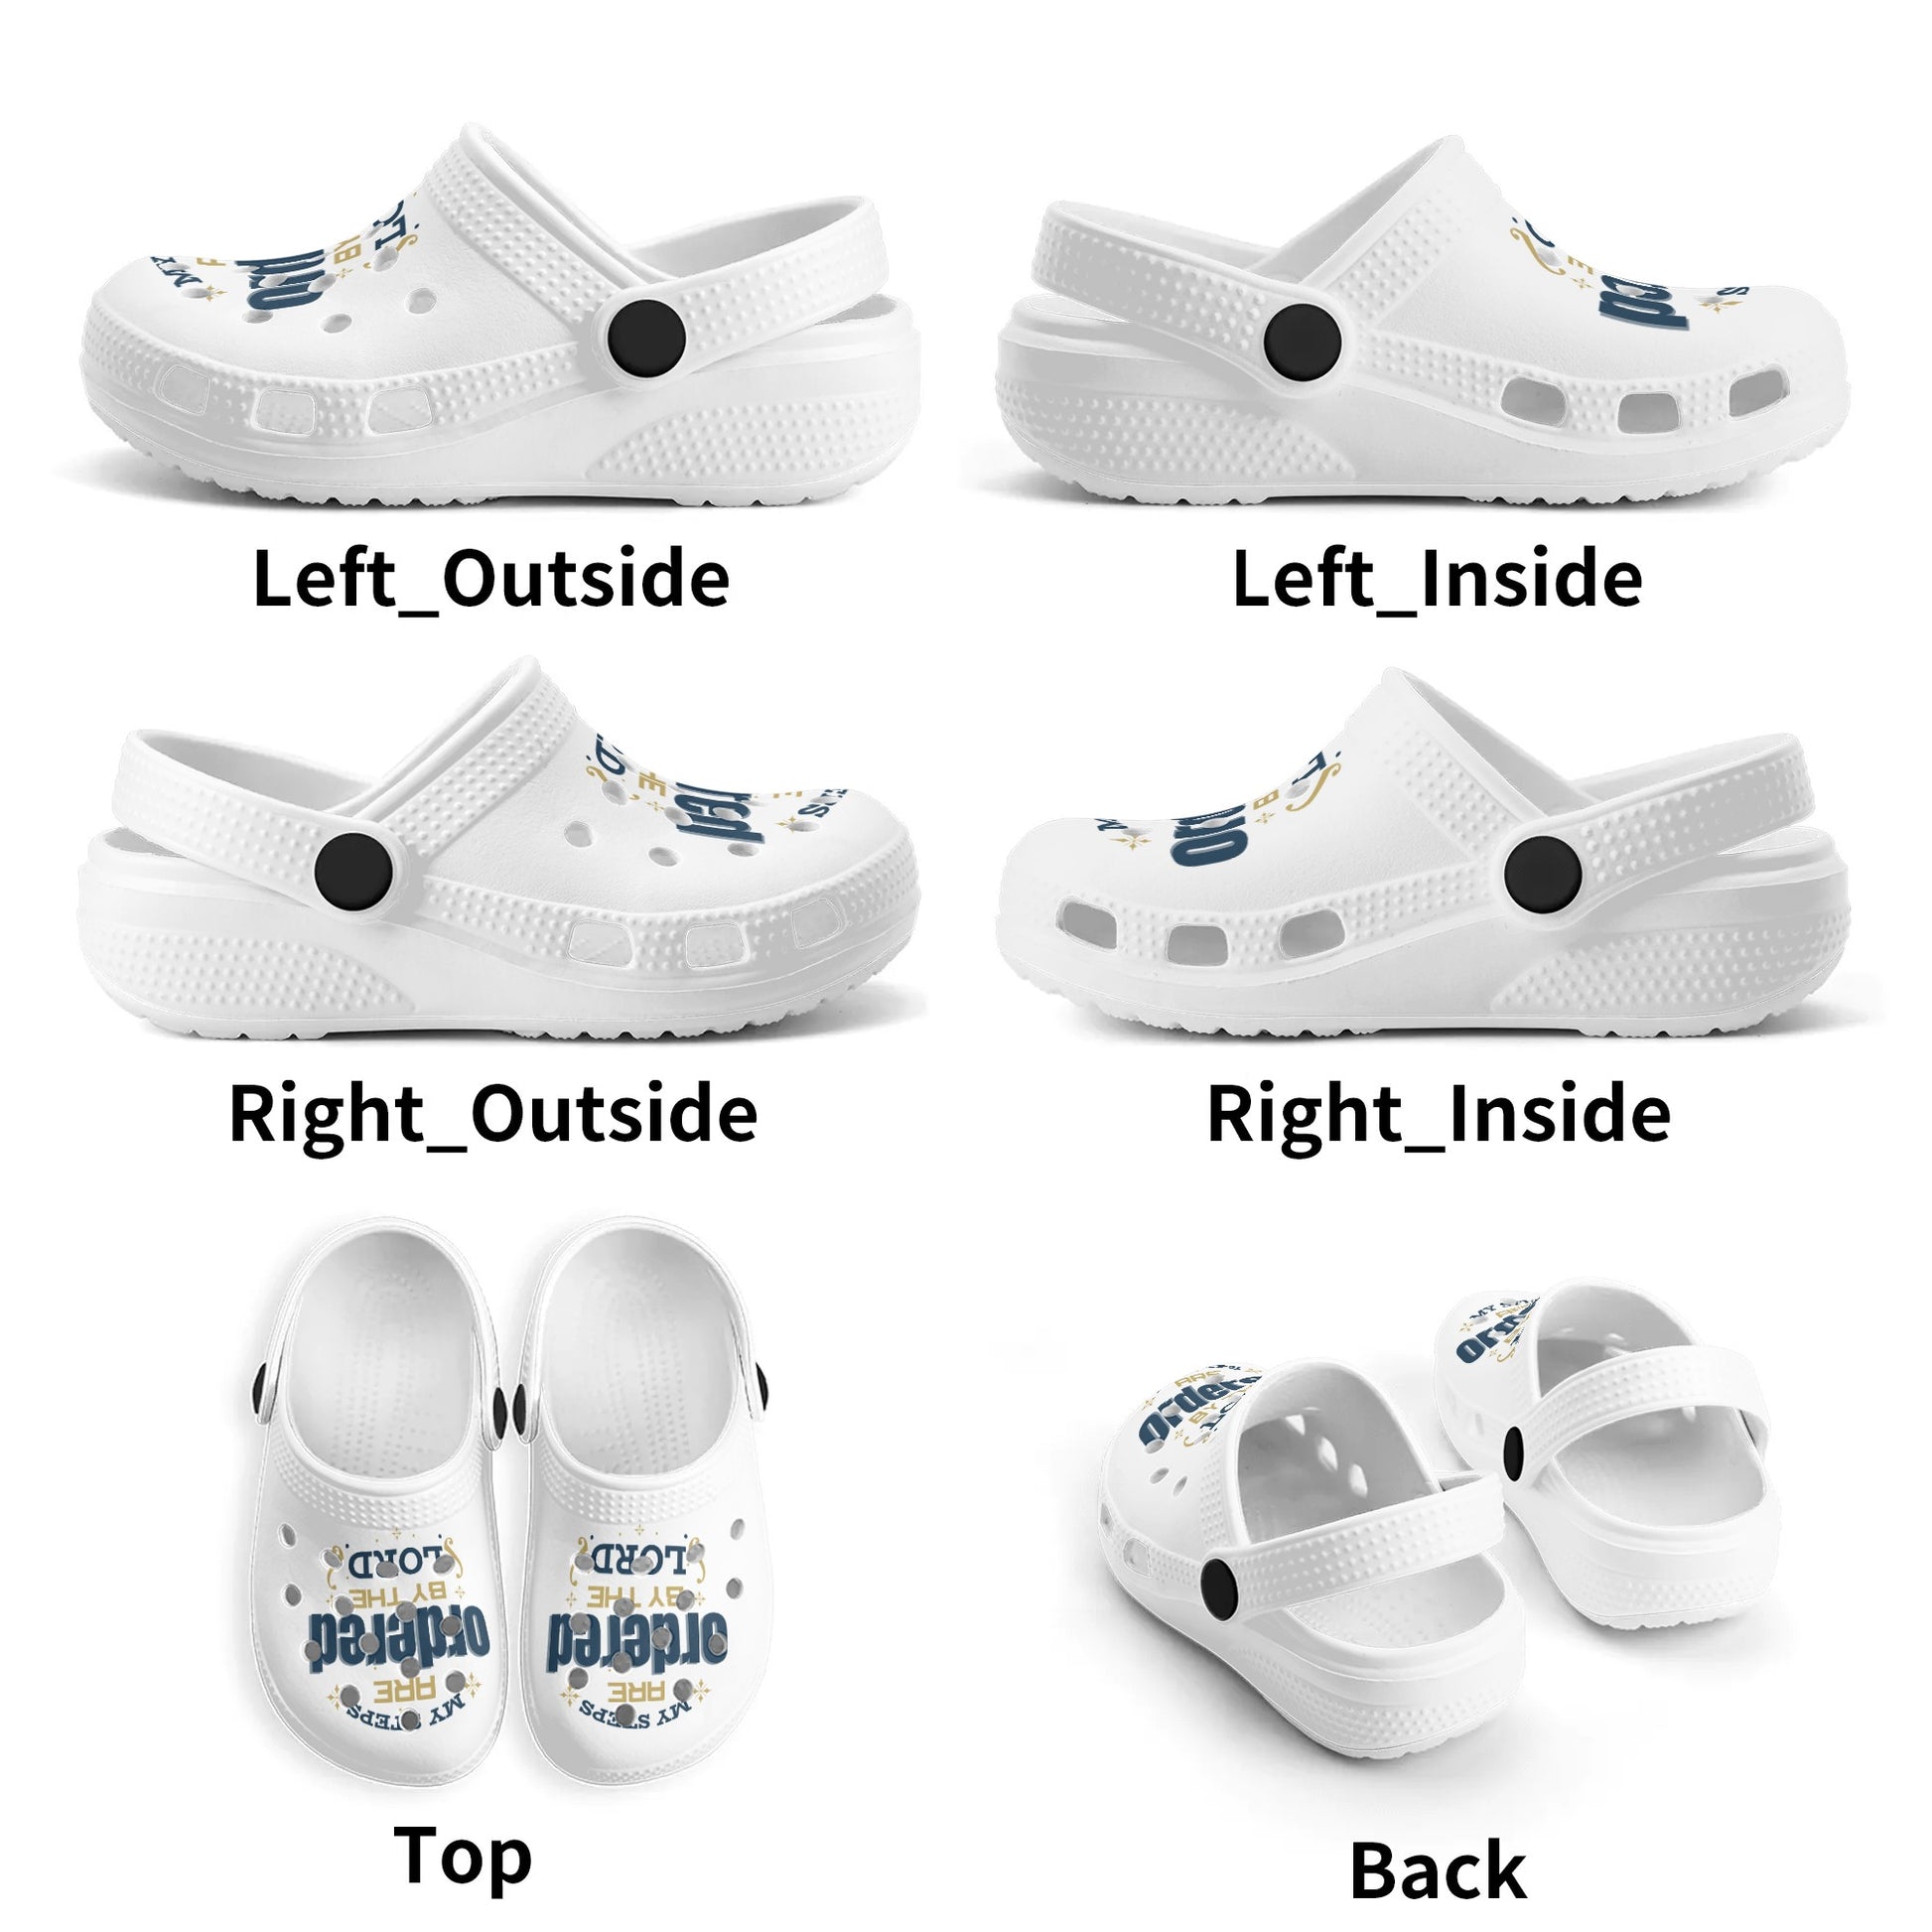 My Steps Are Ordered By The Lord Kids Classic Christian Crocs popcustoms